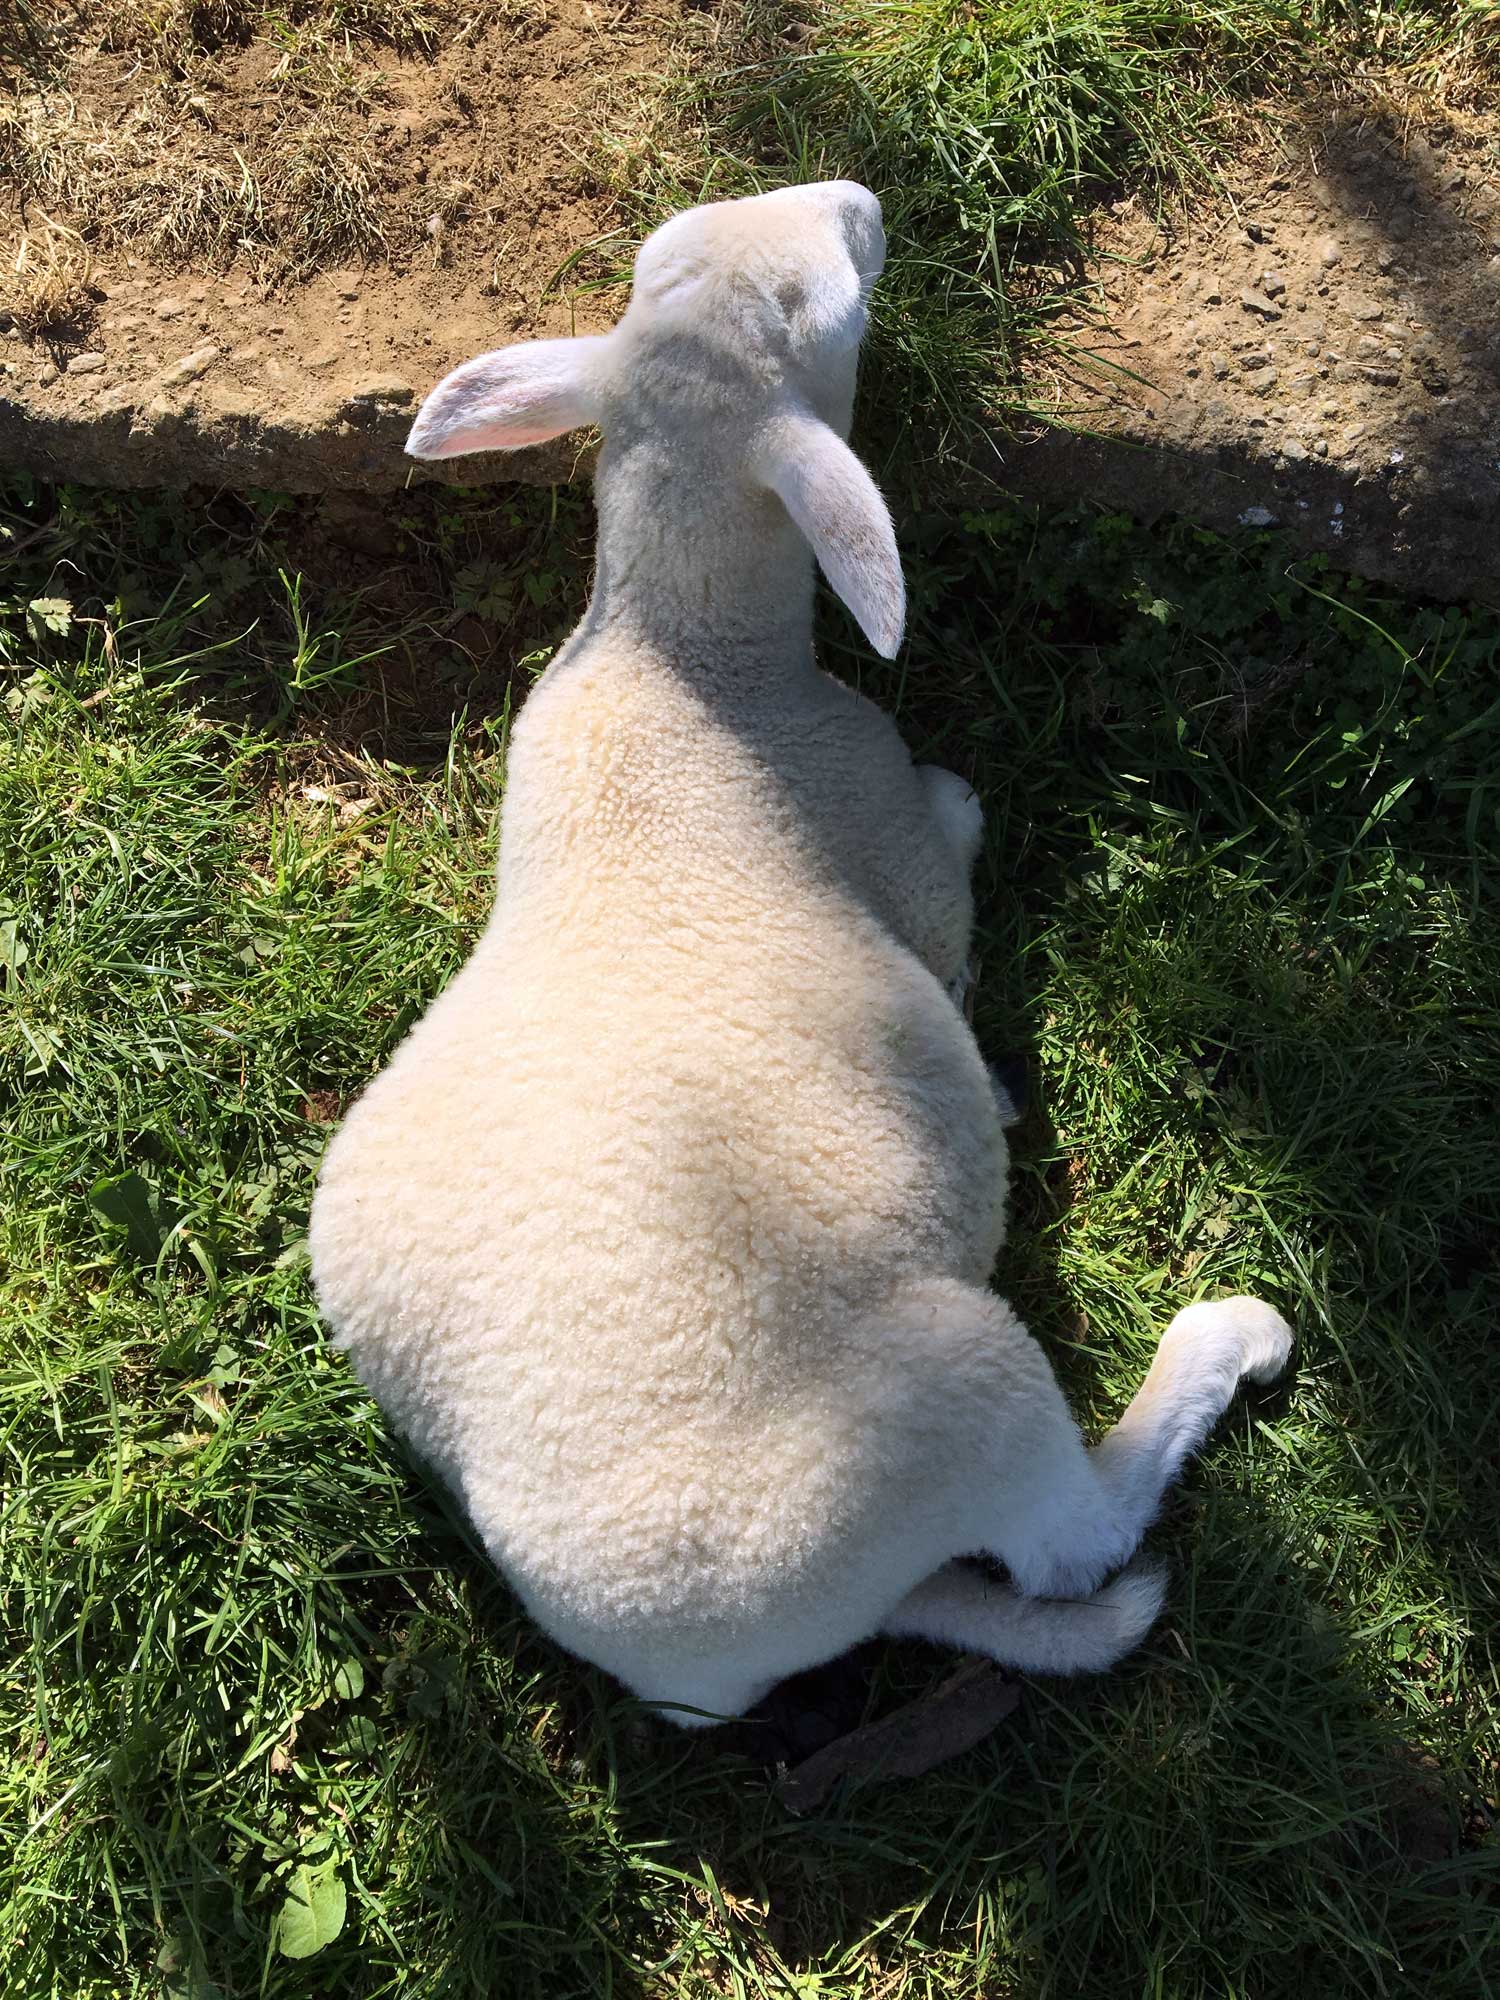 Beans (lamb) with a bloated belly